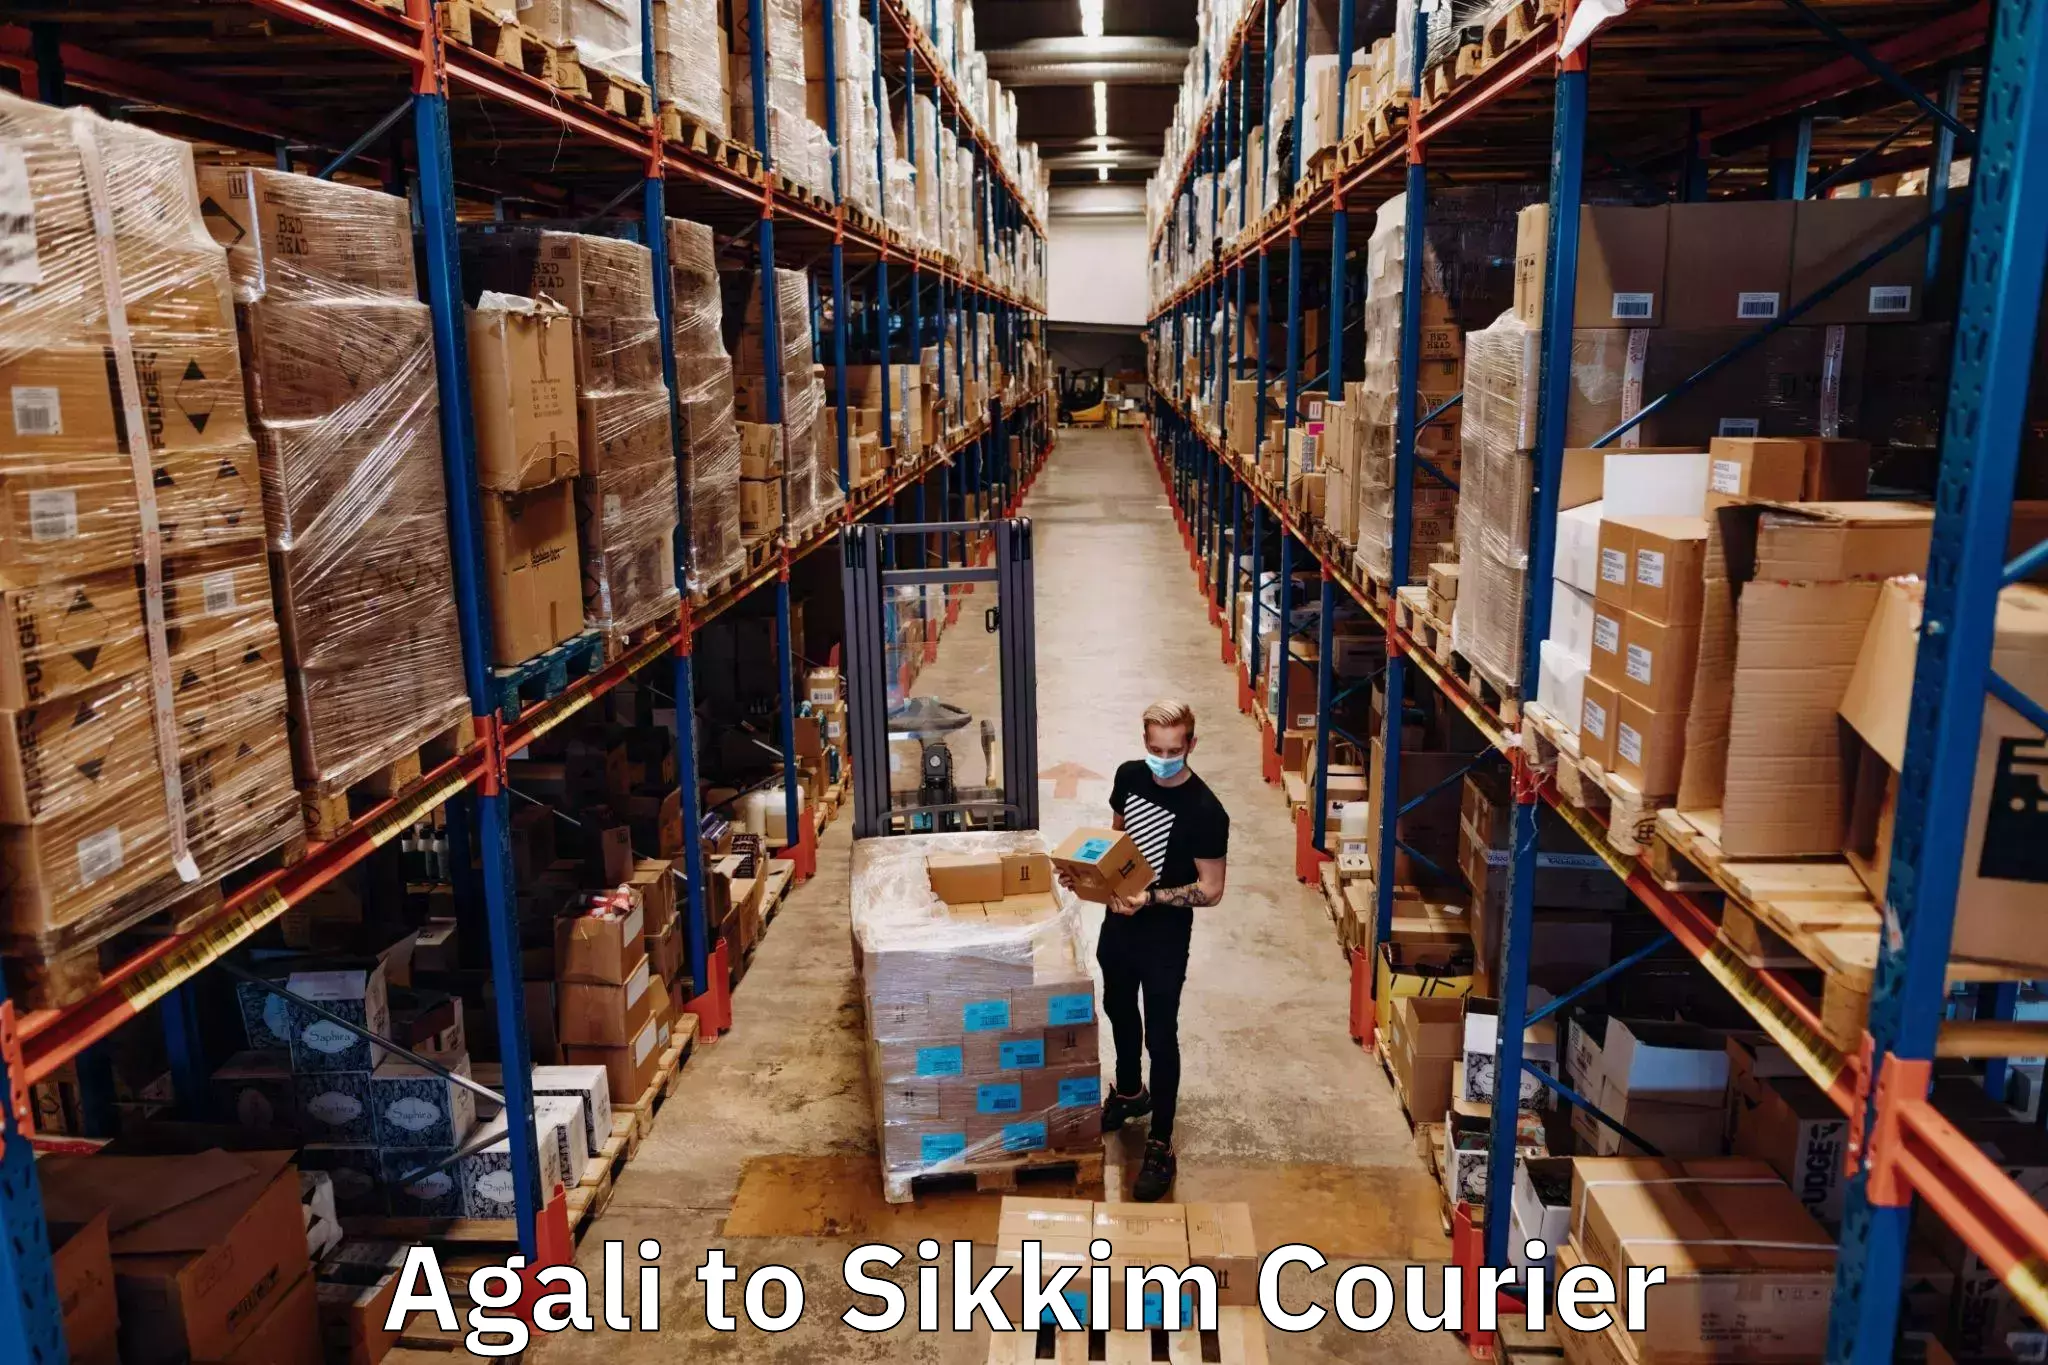 On-call courier service Agali to Sikkim